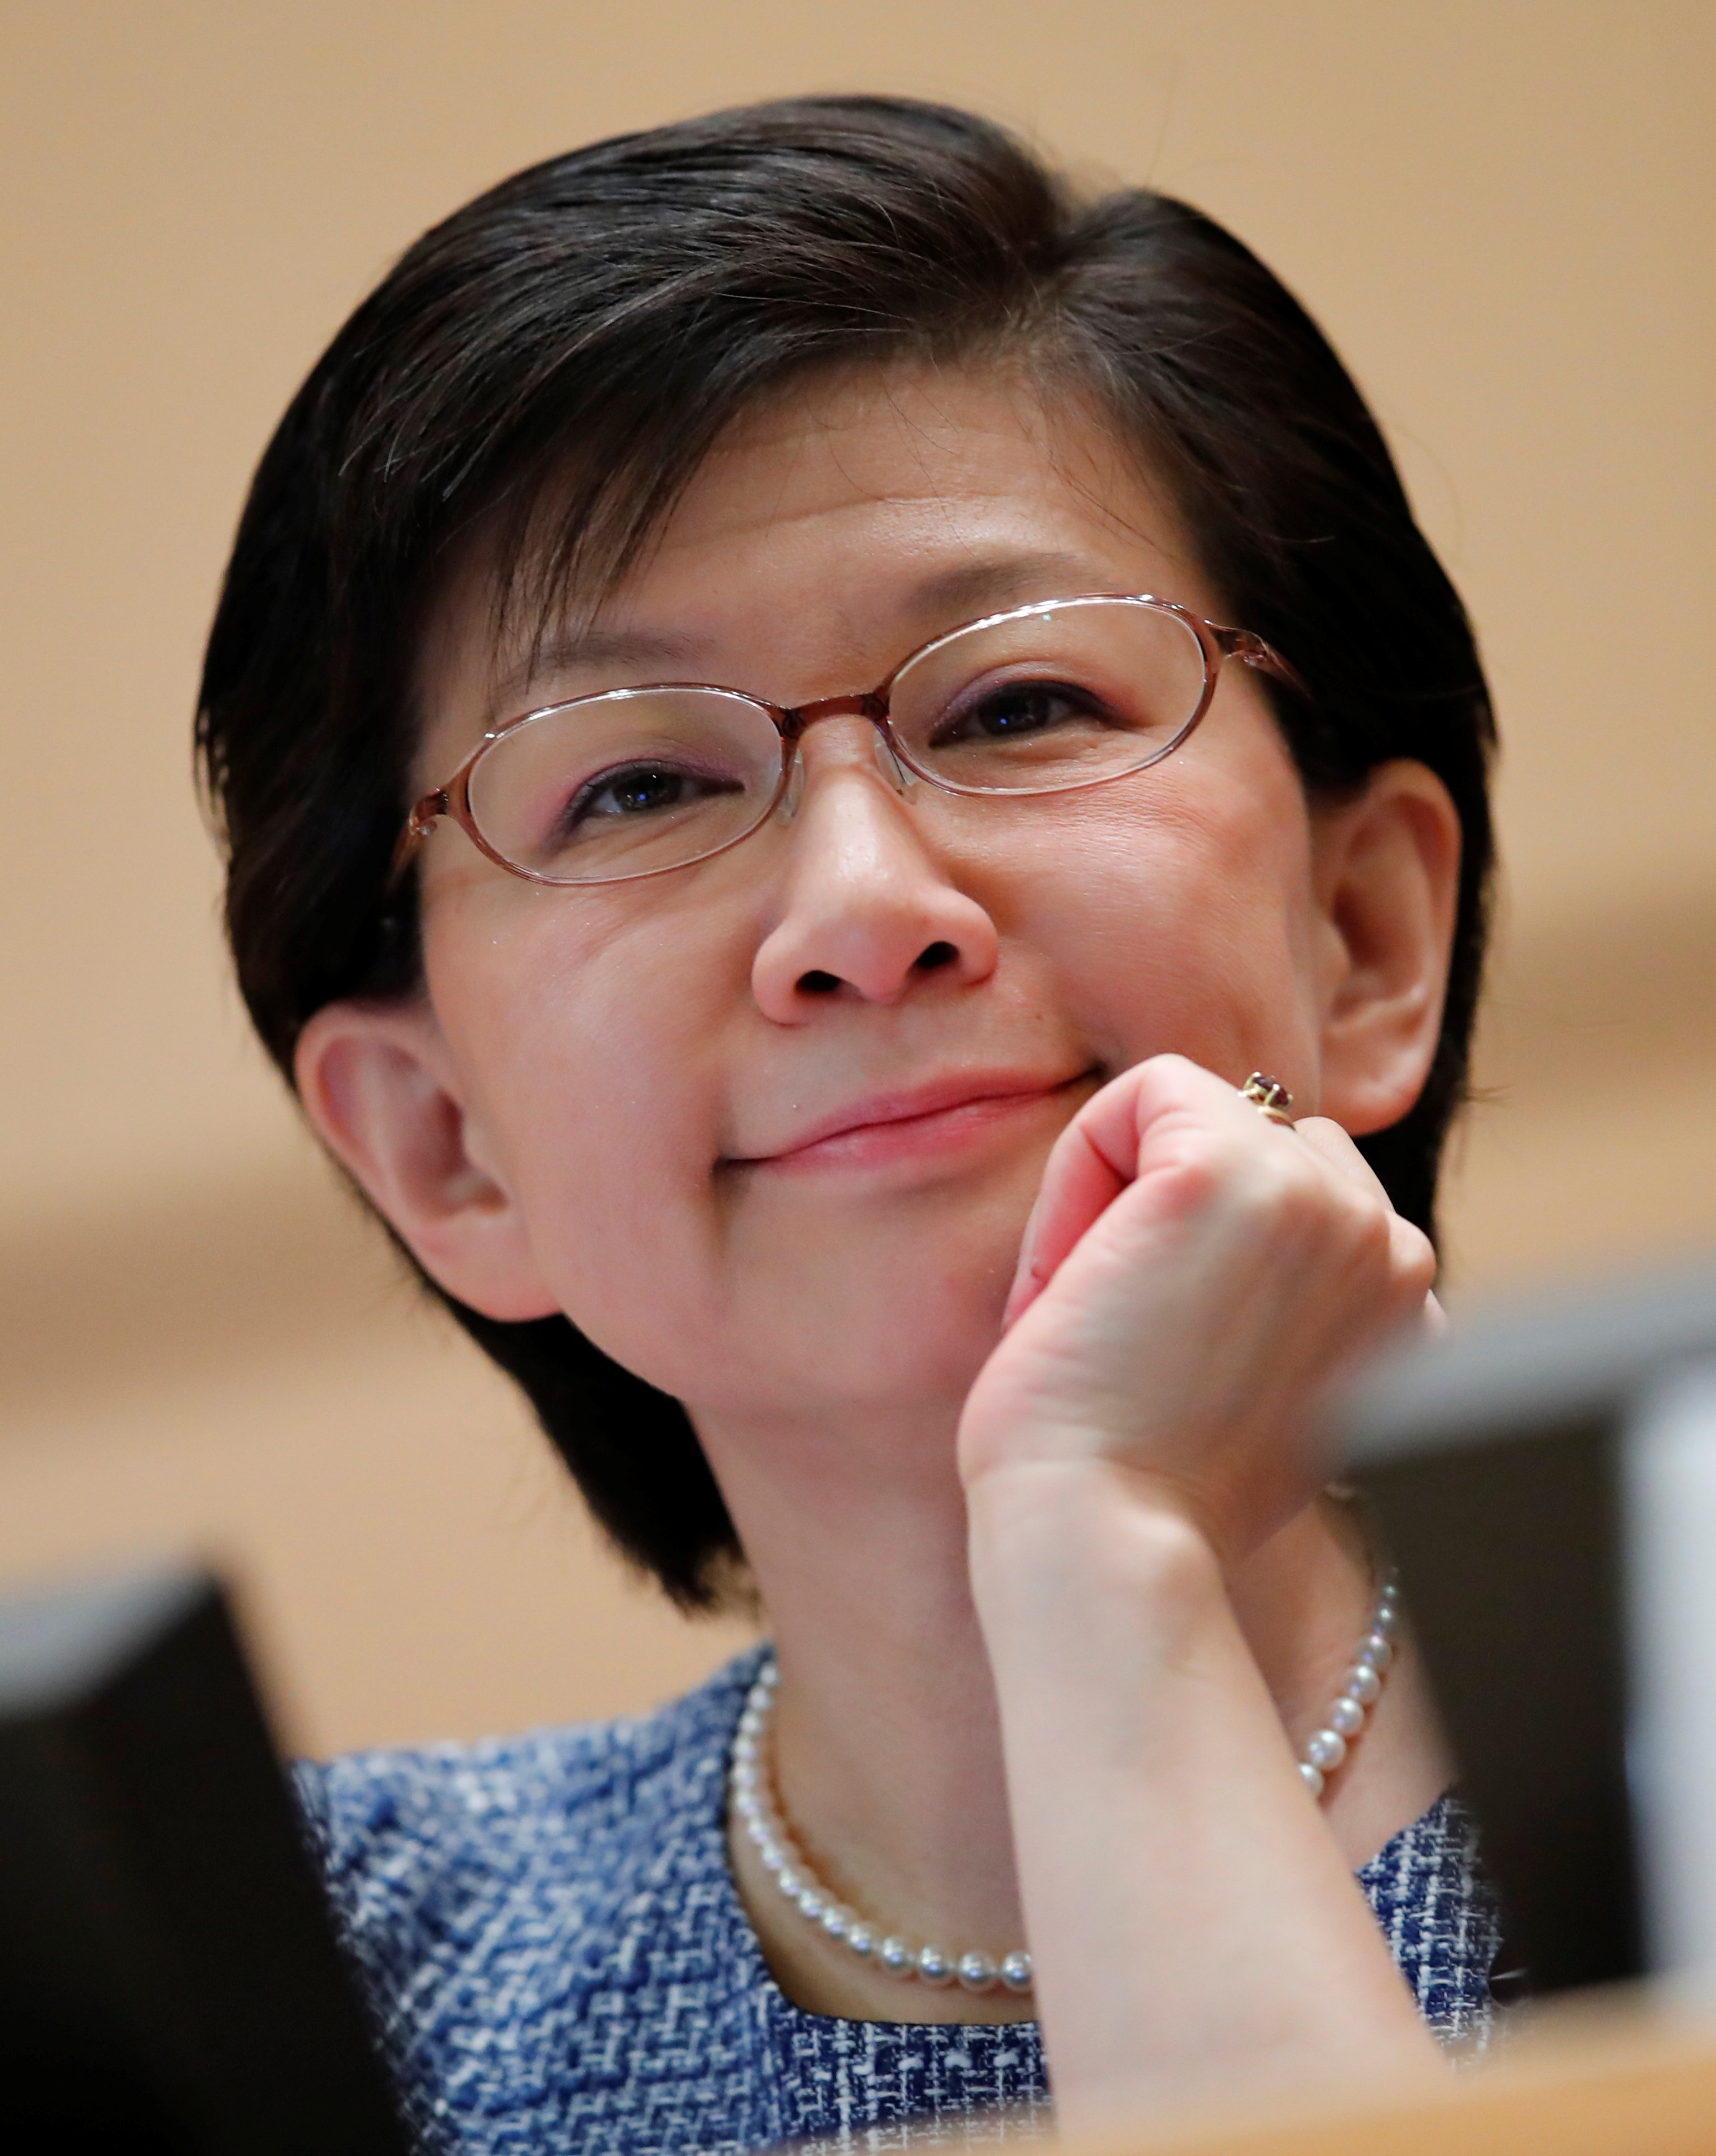 UN High representative for Disarmament Affairs Nakamitsu attends the 2nd Preparatory session of the 2020 Non Proliferation TreatyReview Conference in Geneva